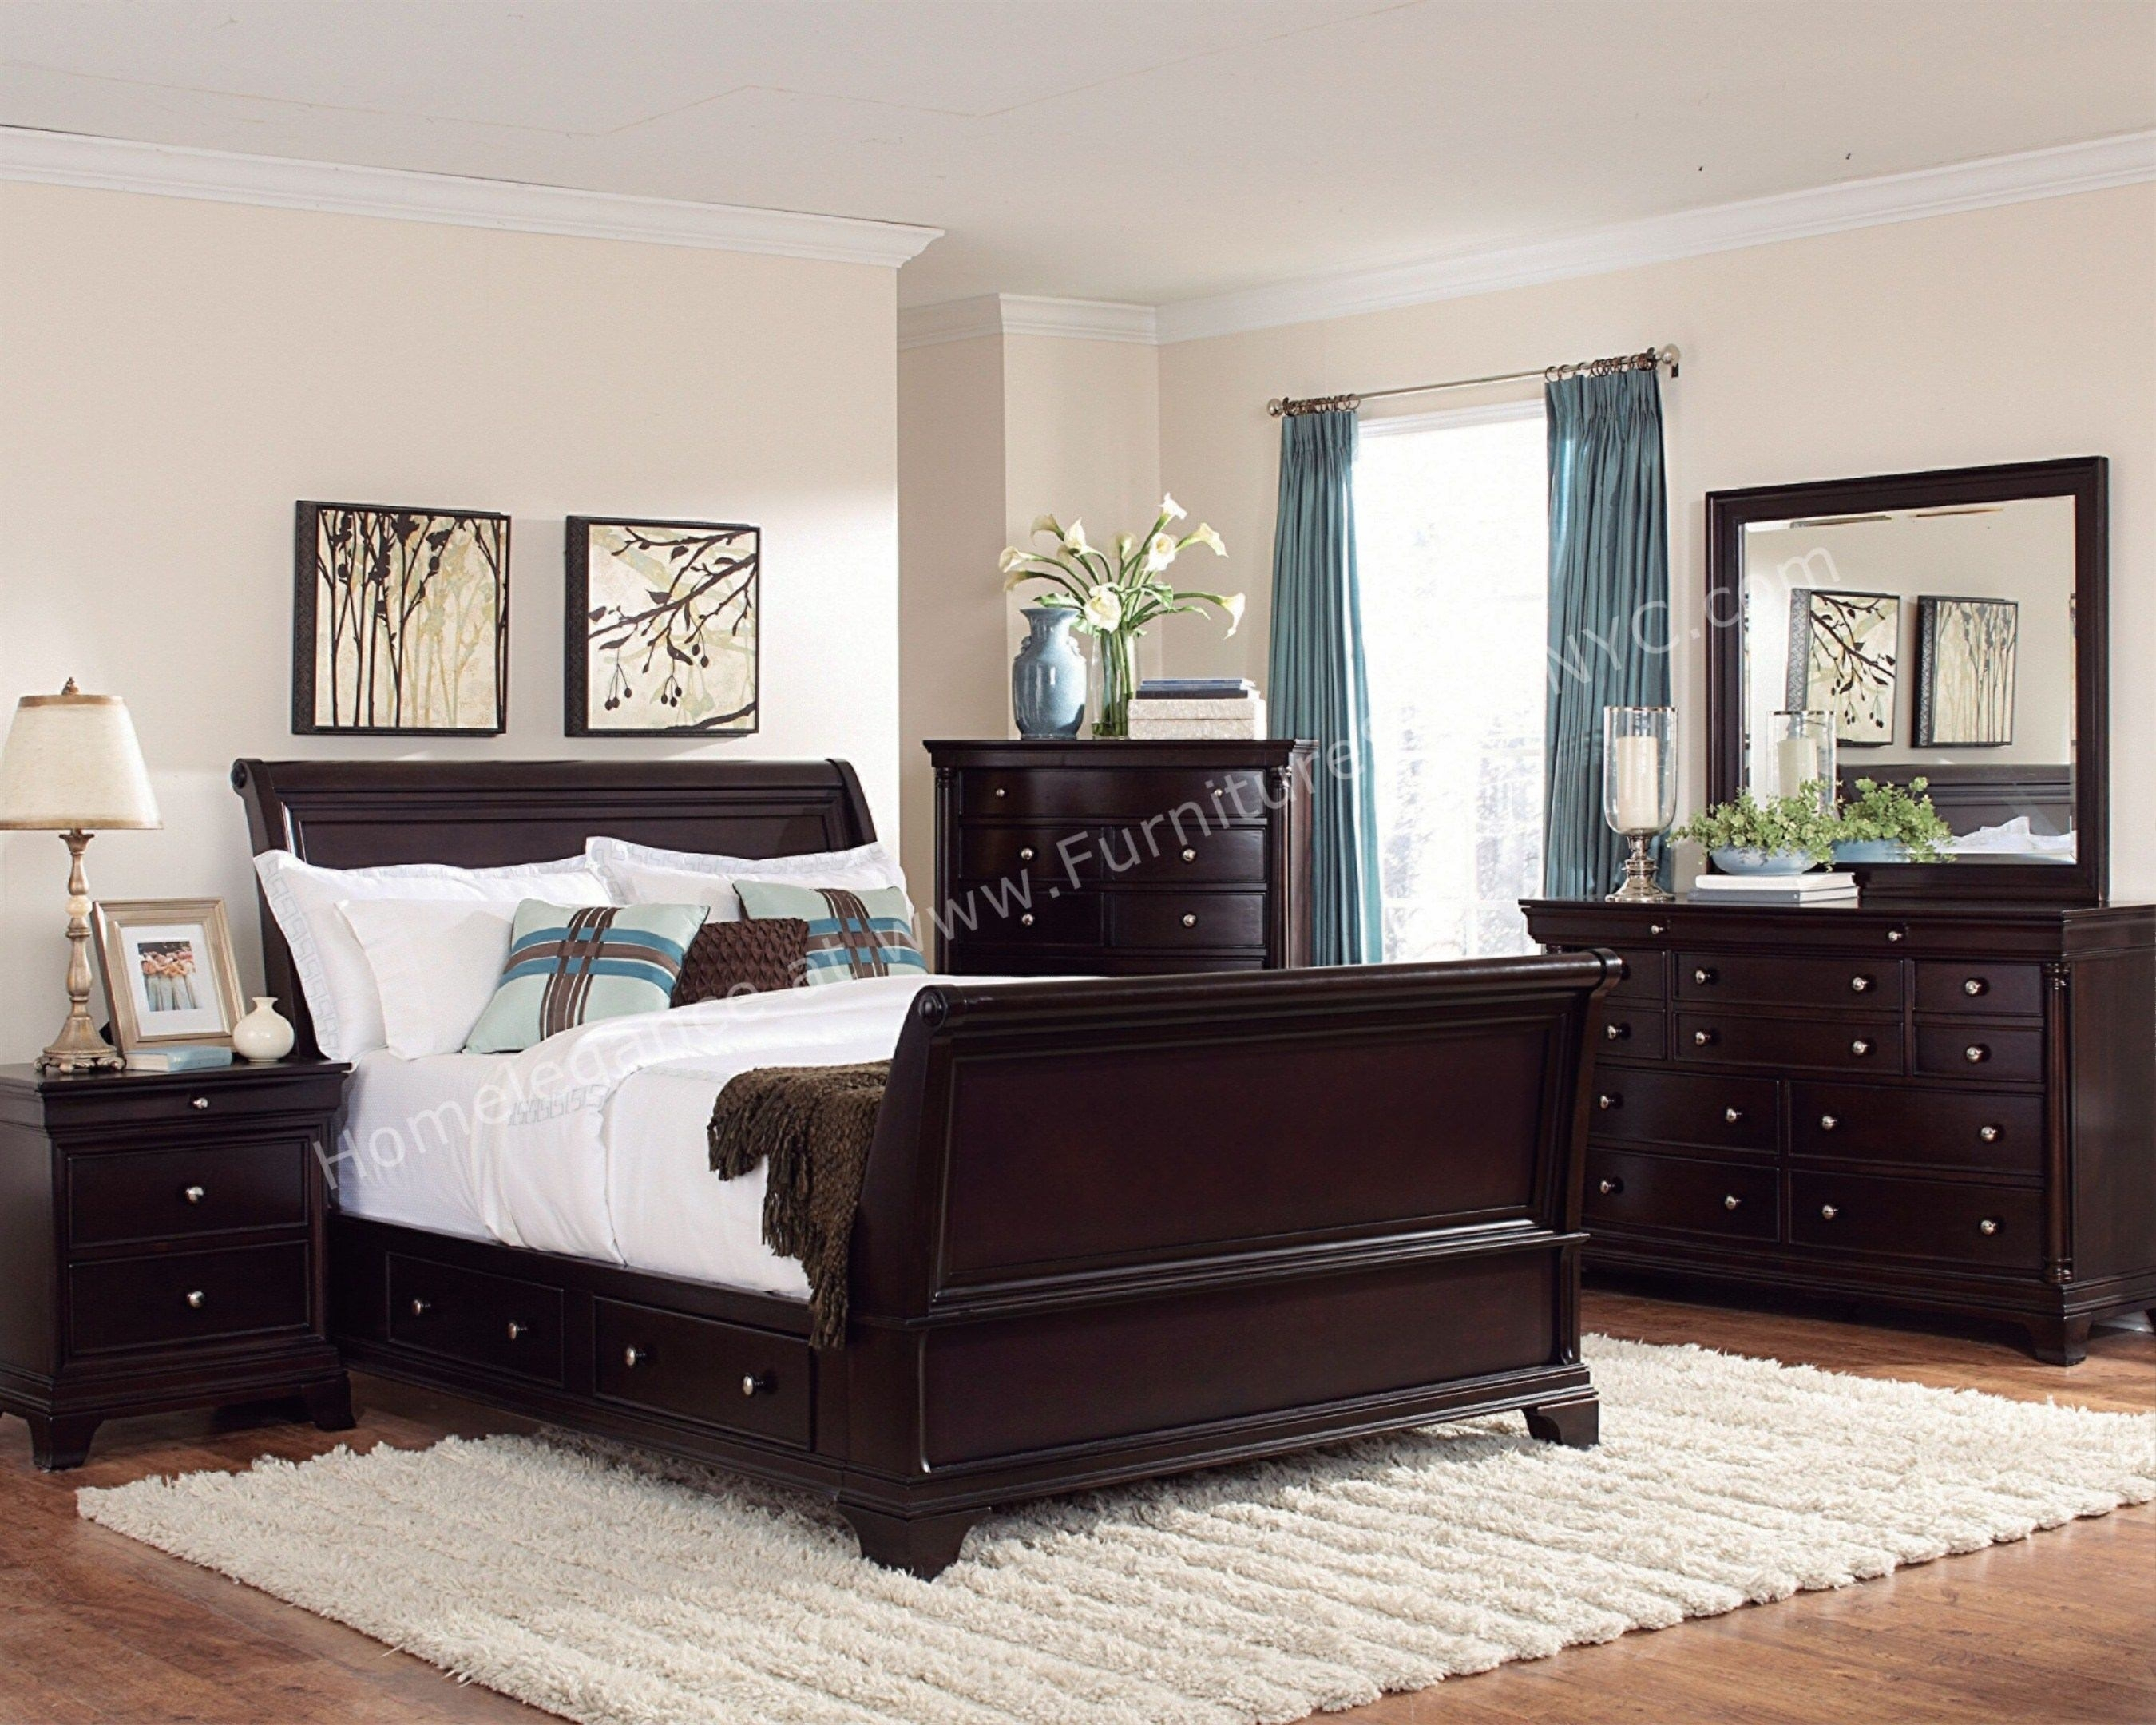 Modern Dark Wood Bedroom Furniture Cileather Home Design Ideas pertaining to size 2700 X 2160